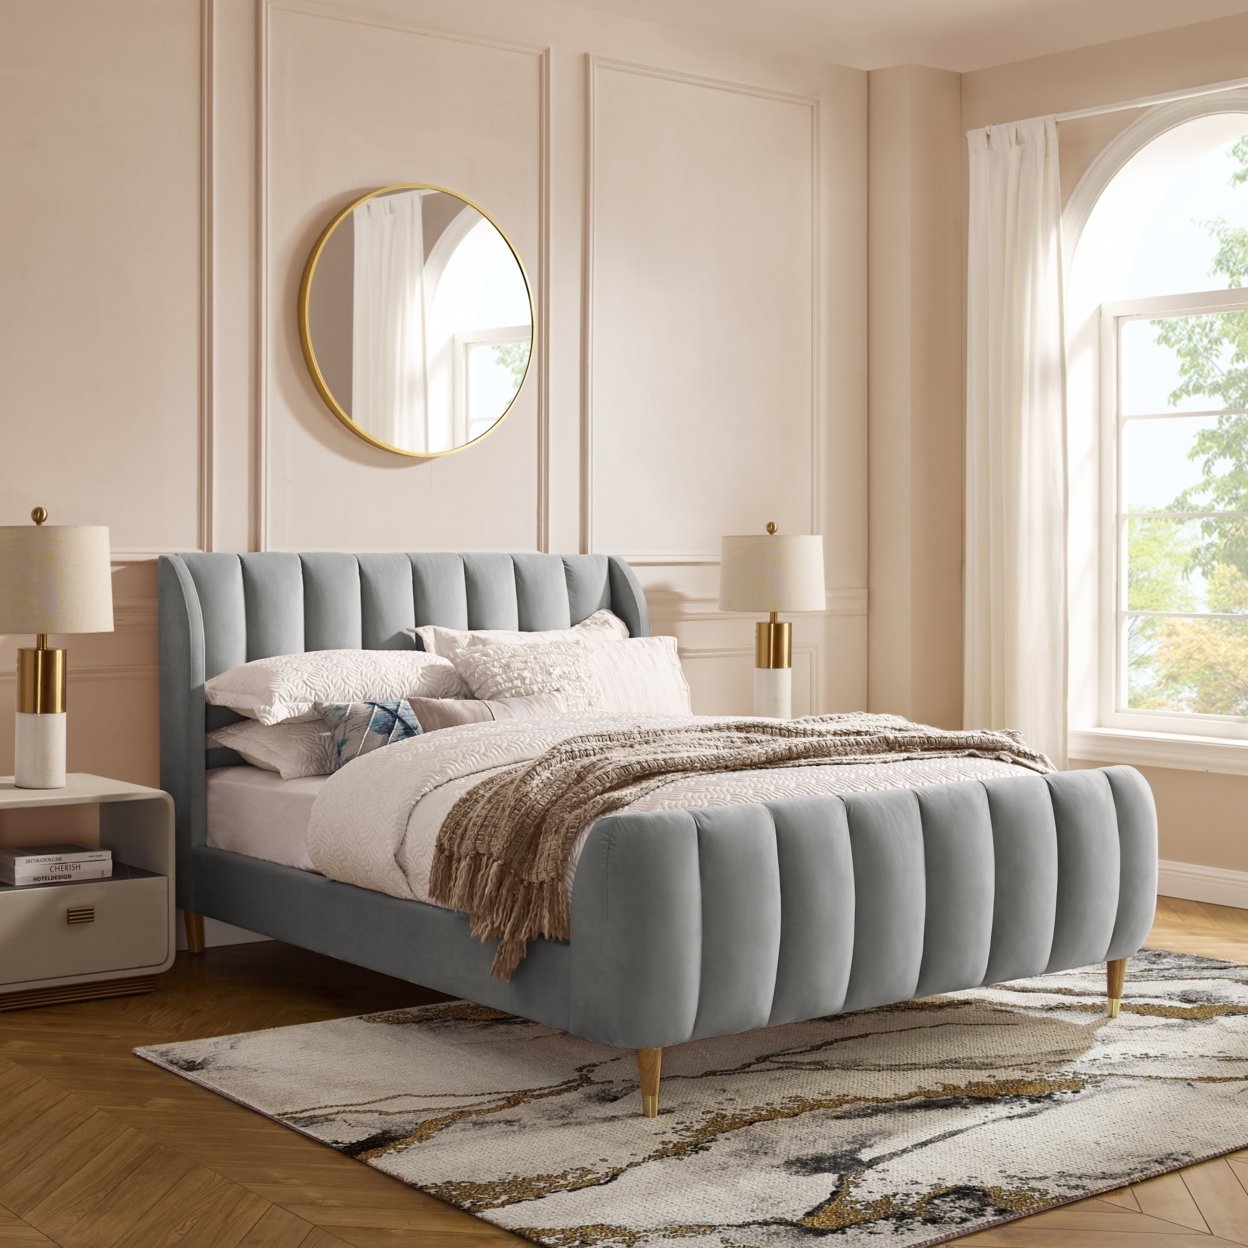 Sana Bed-Upholstered-Channel Tufted-Slats Included - Beige, Queen